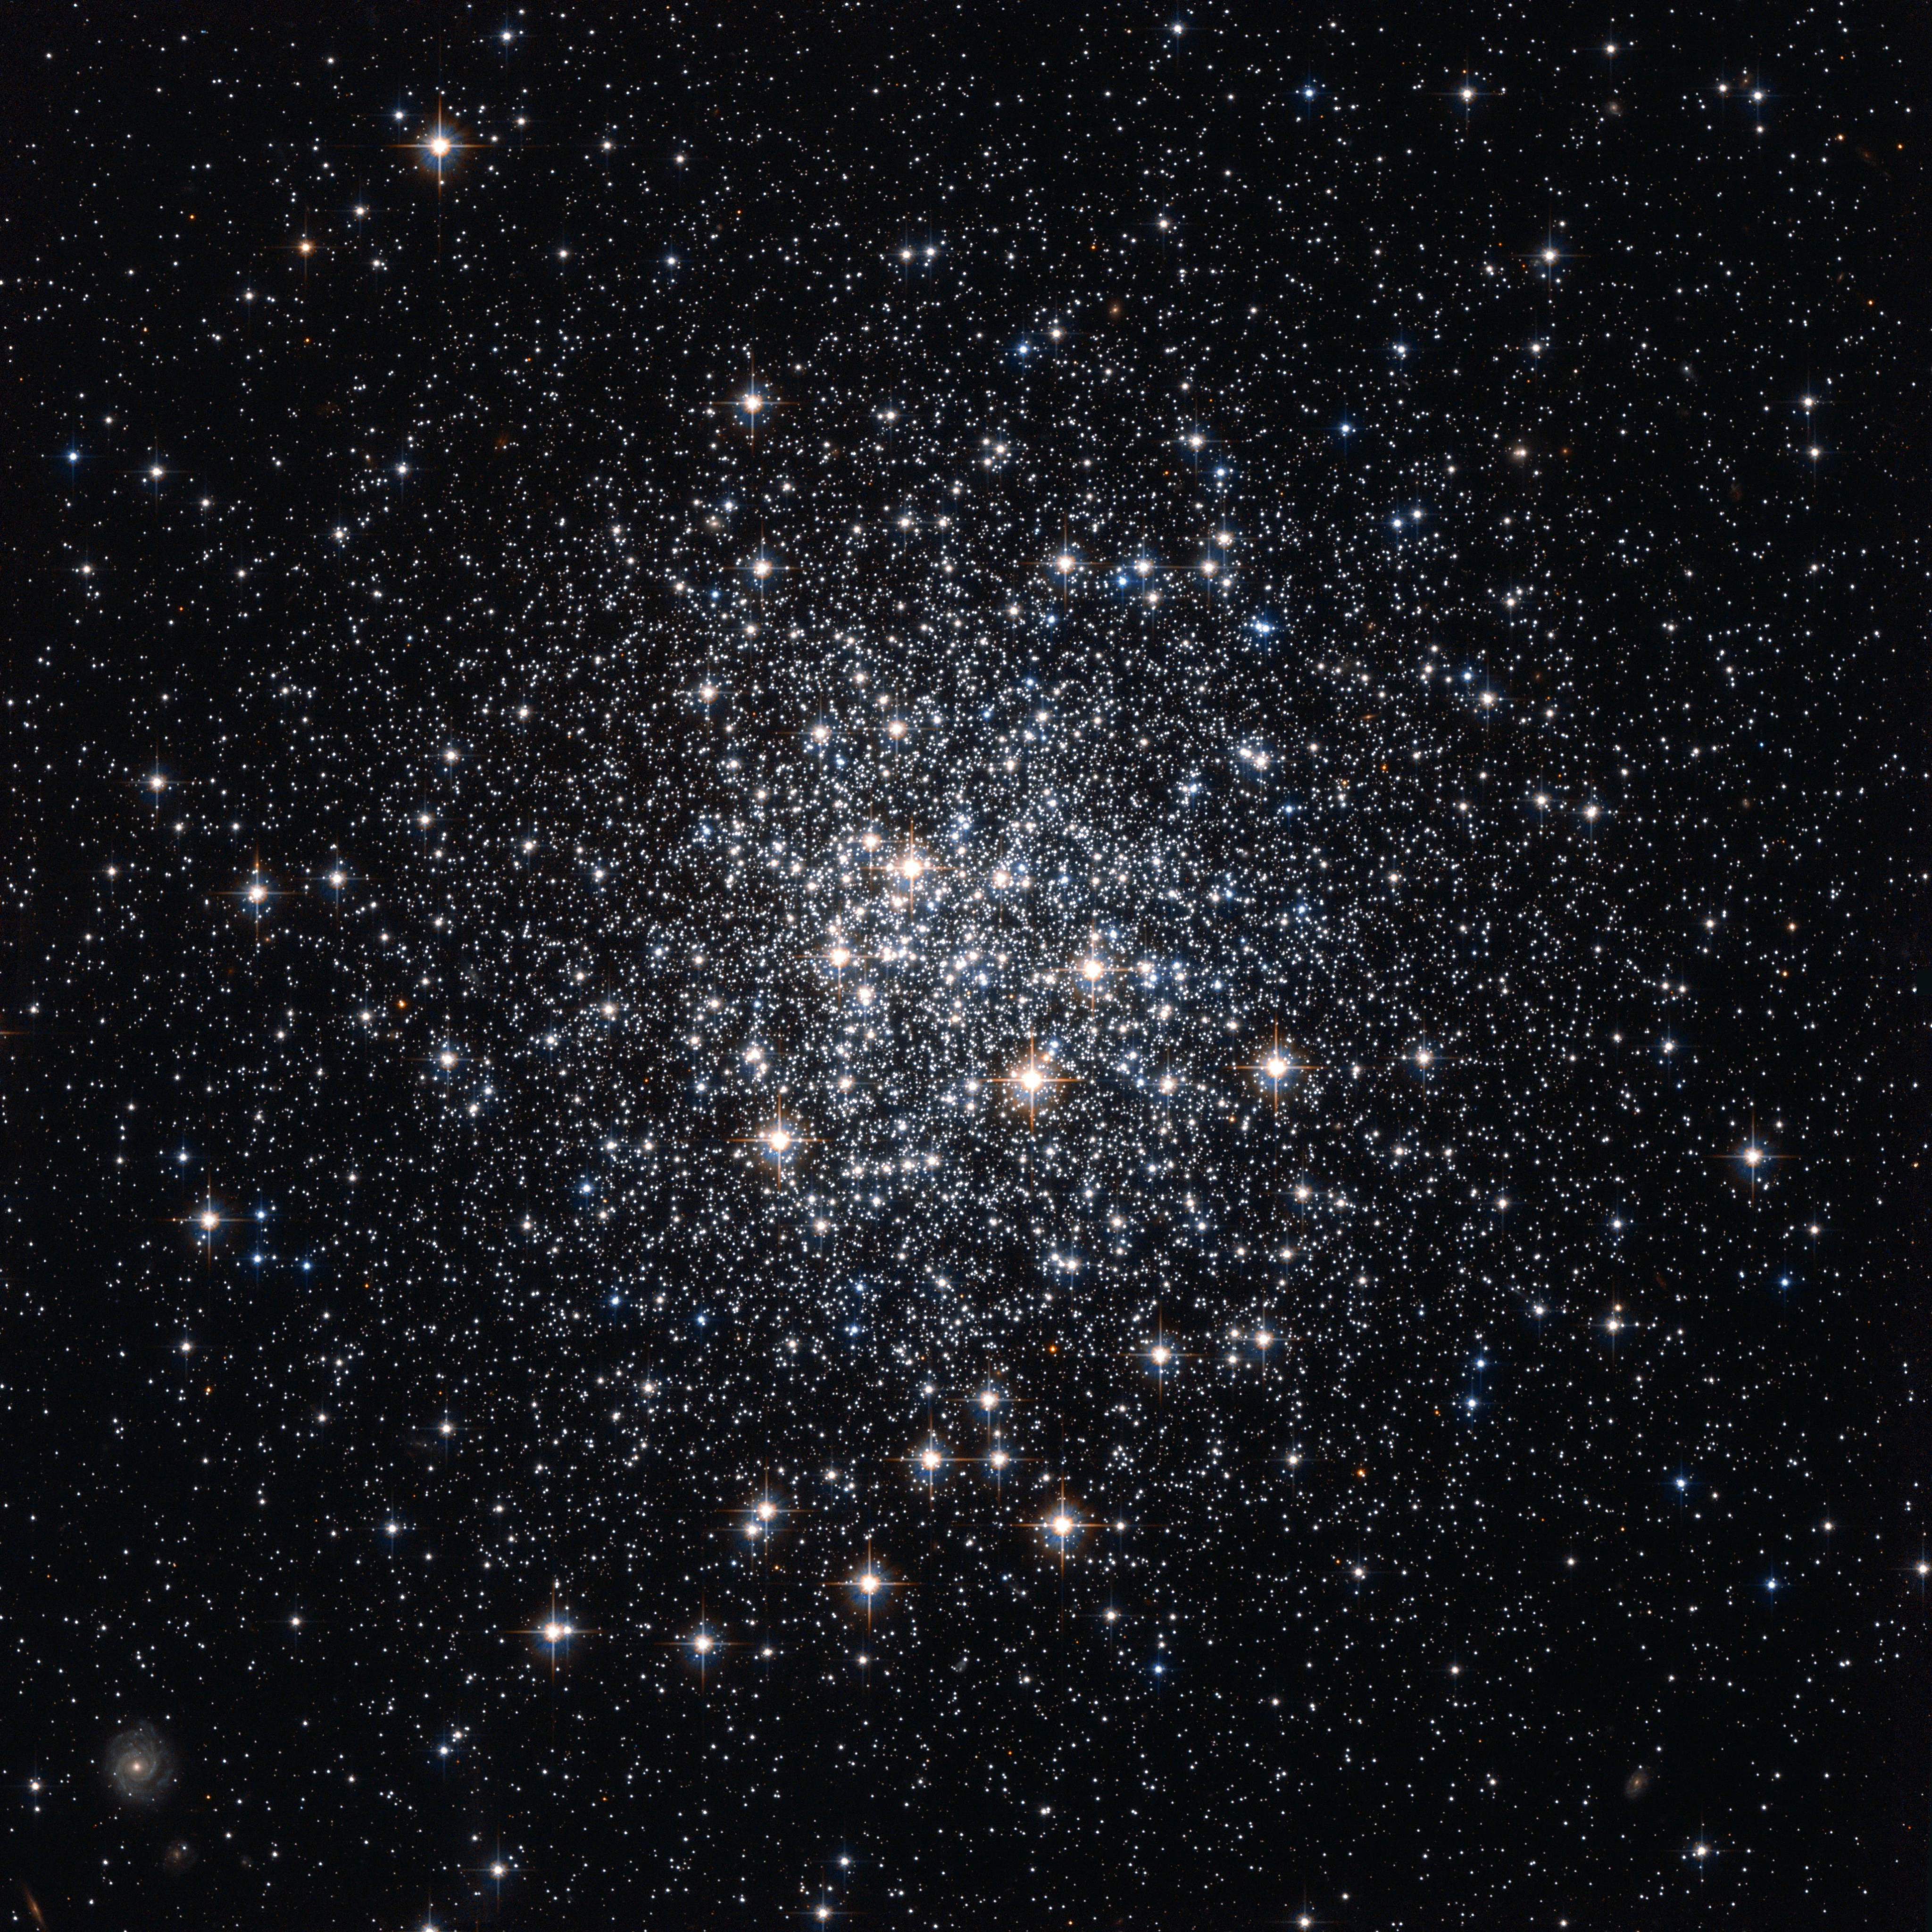 A cluster of white stars, loosely concentrated toward the center.